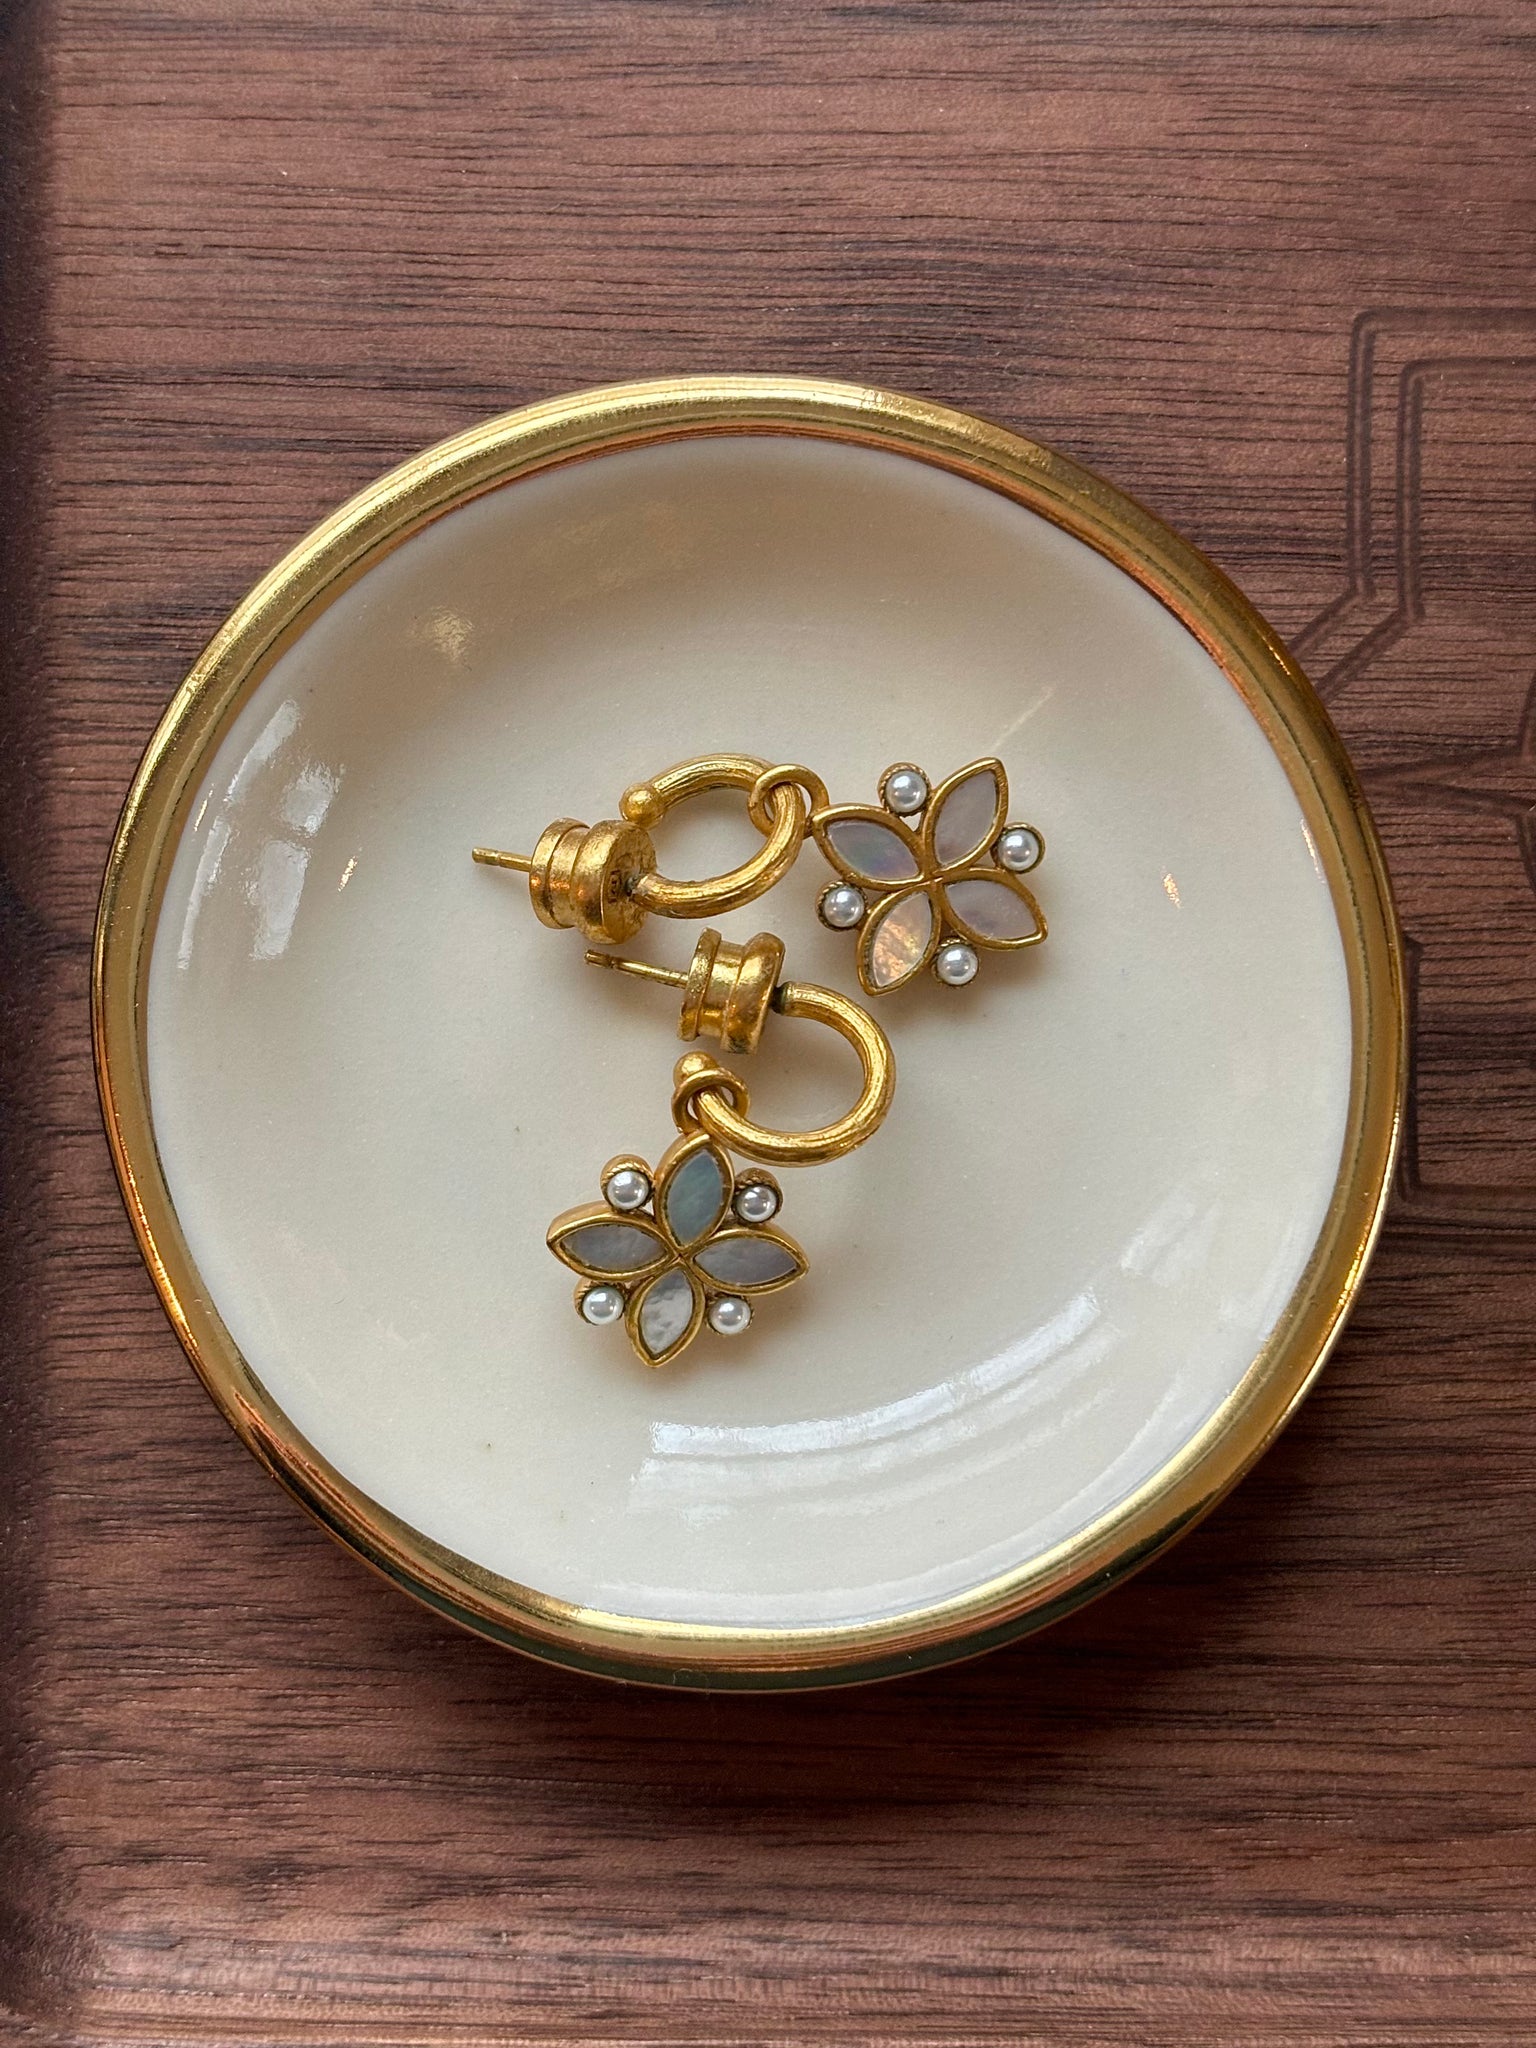 Handmade Ring Dish with Gold